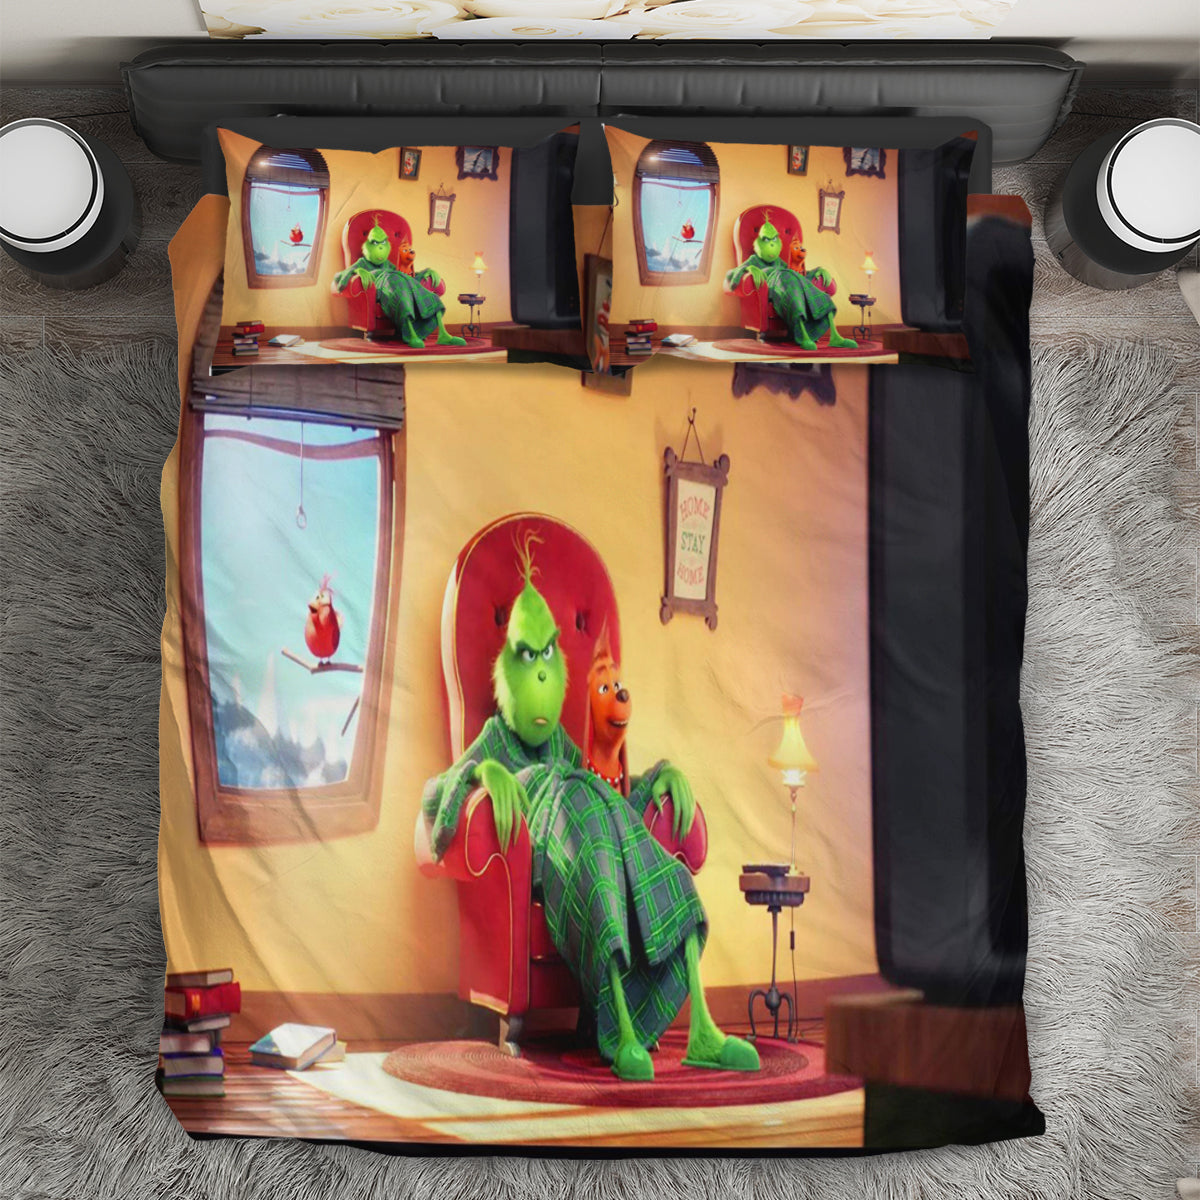 The Grinch Christmas Grinch Max 12 3PCS Bedding Set Duvet Cover And Pillow Cases Gift For Fan